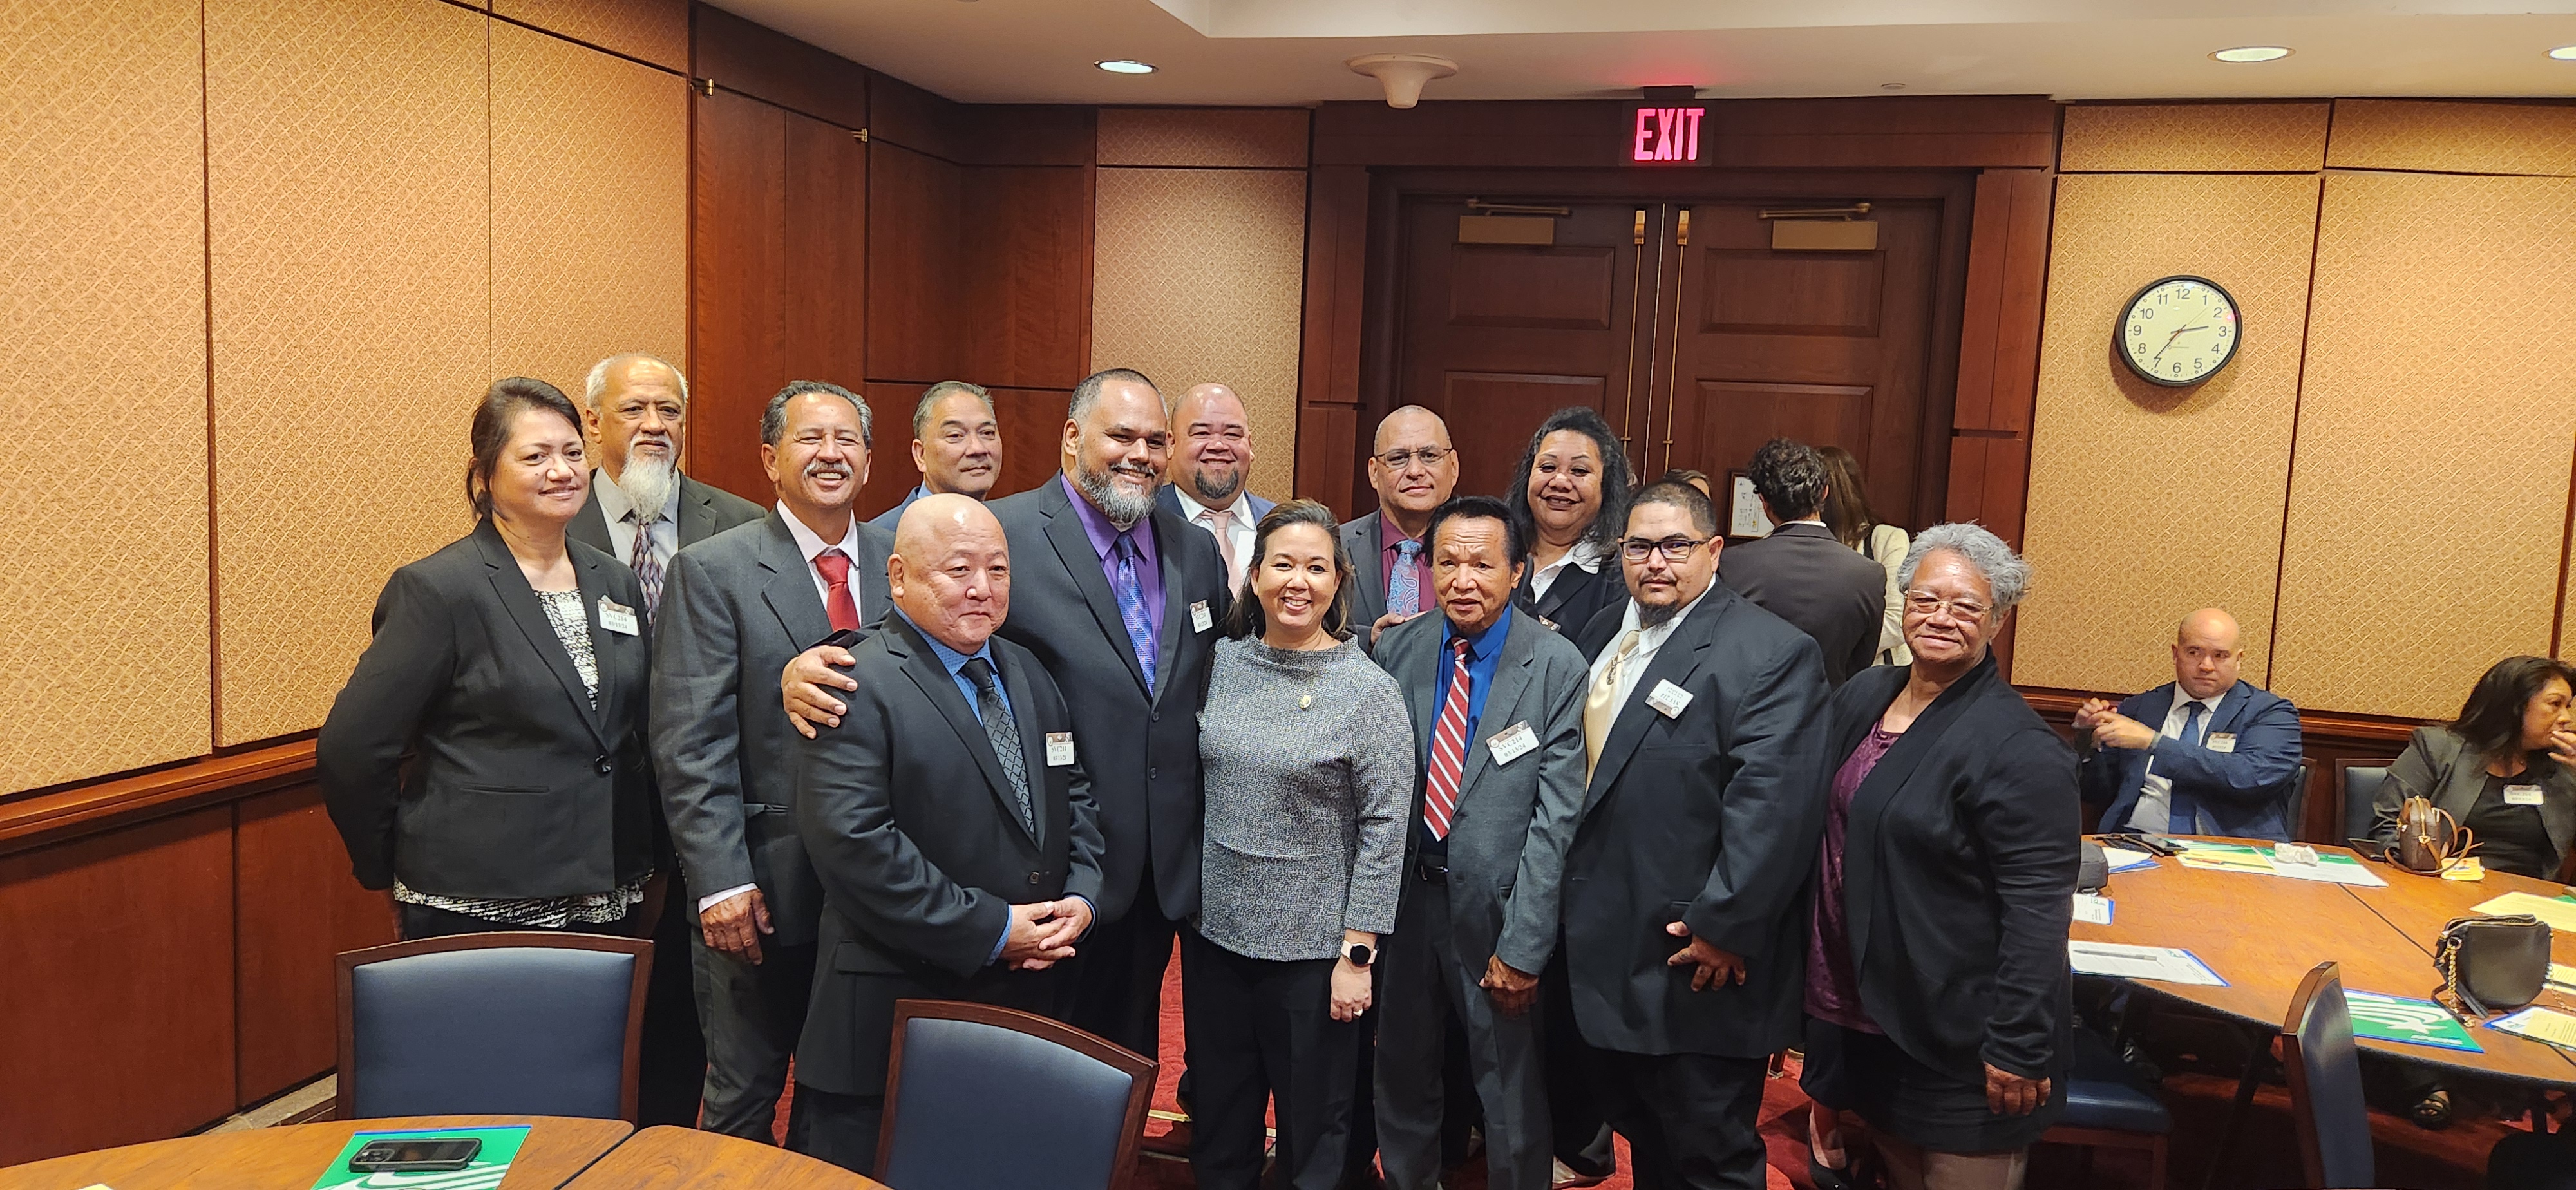 On a visit to Capitol Hill, AFSCME members from Hawaii push our union’s priorities